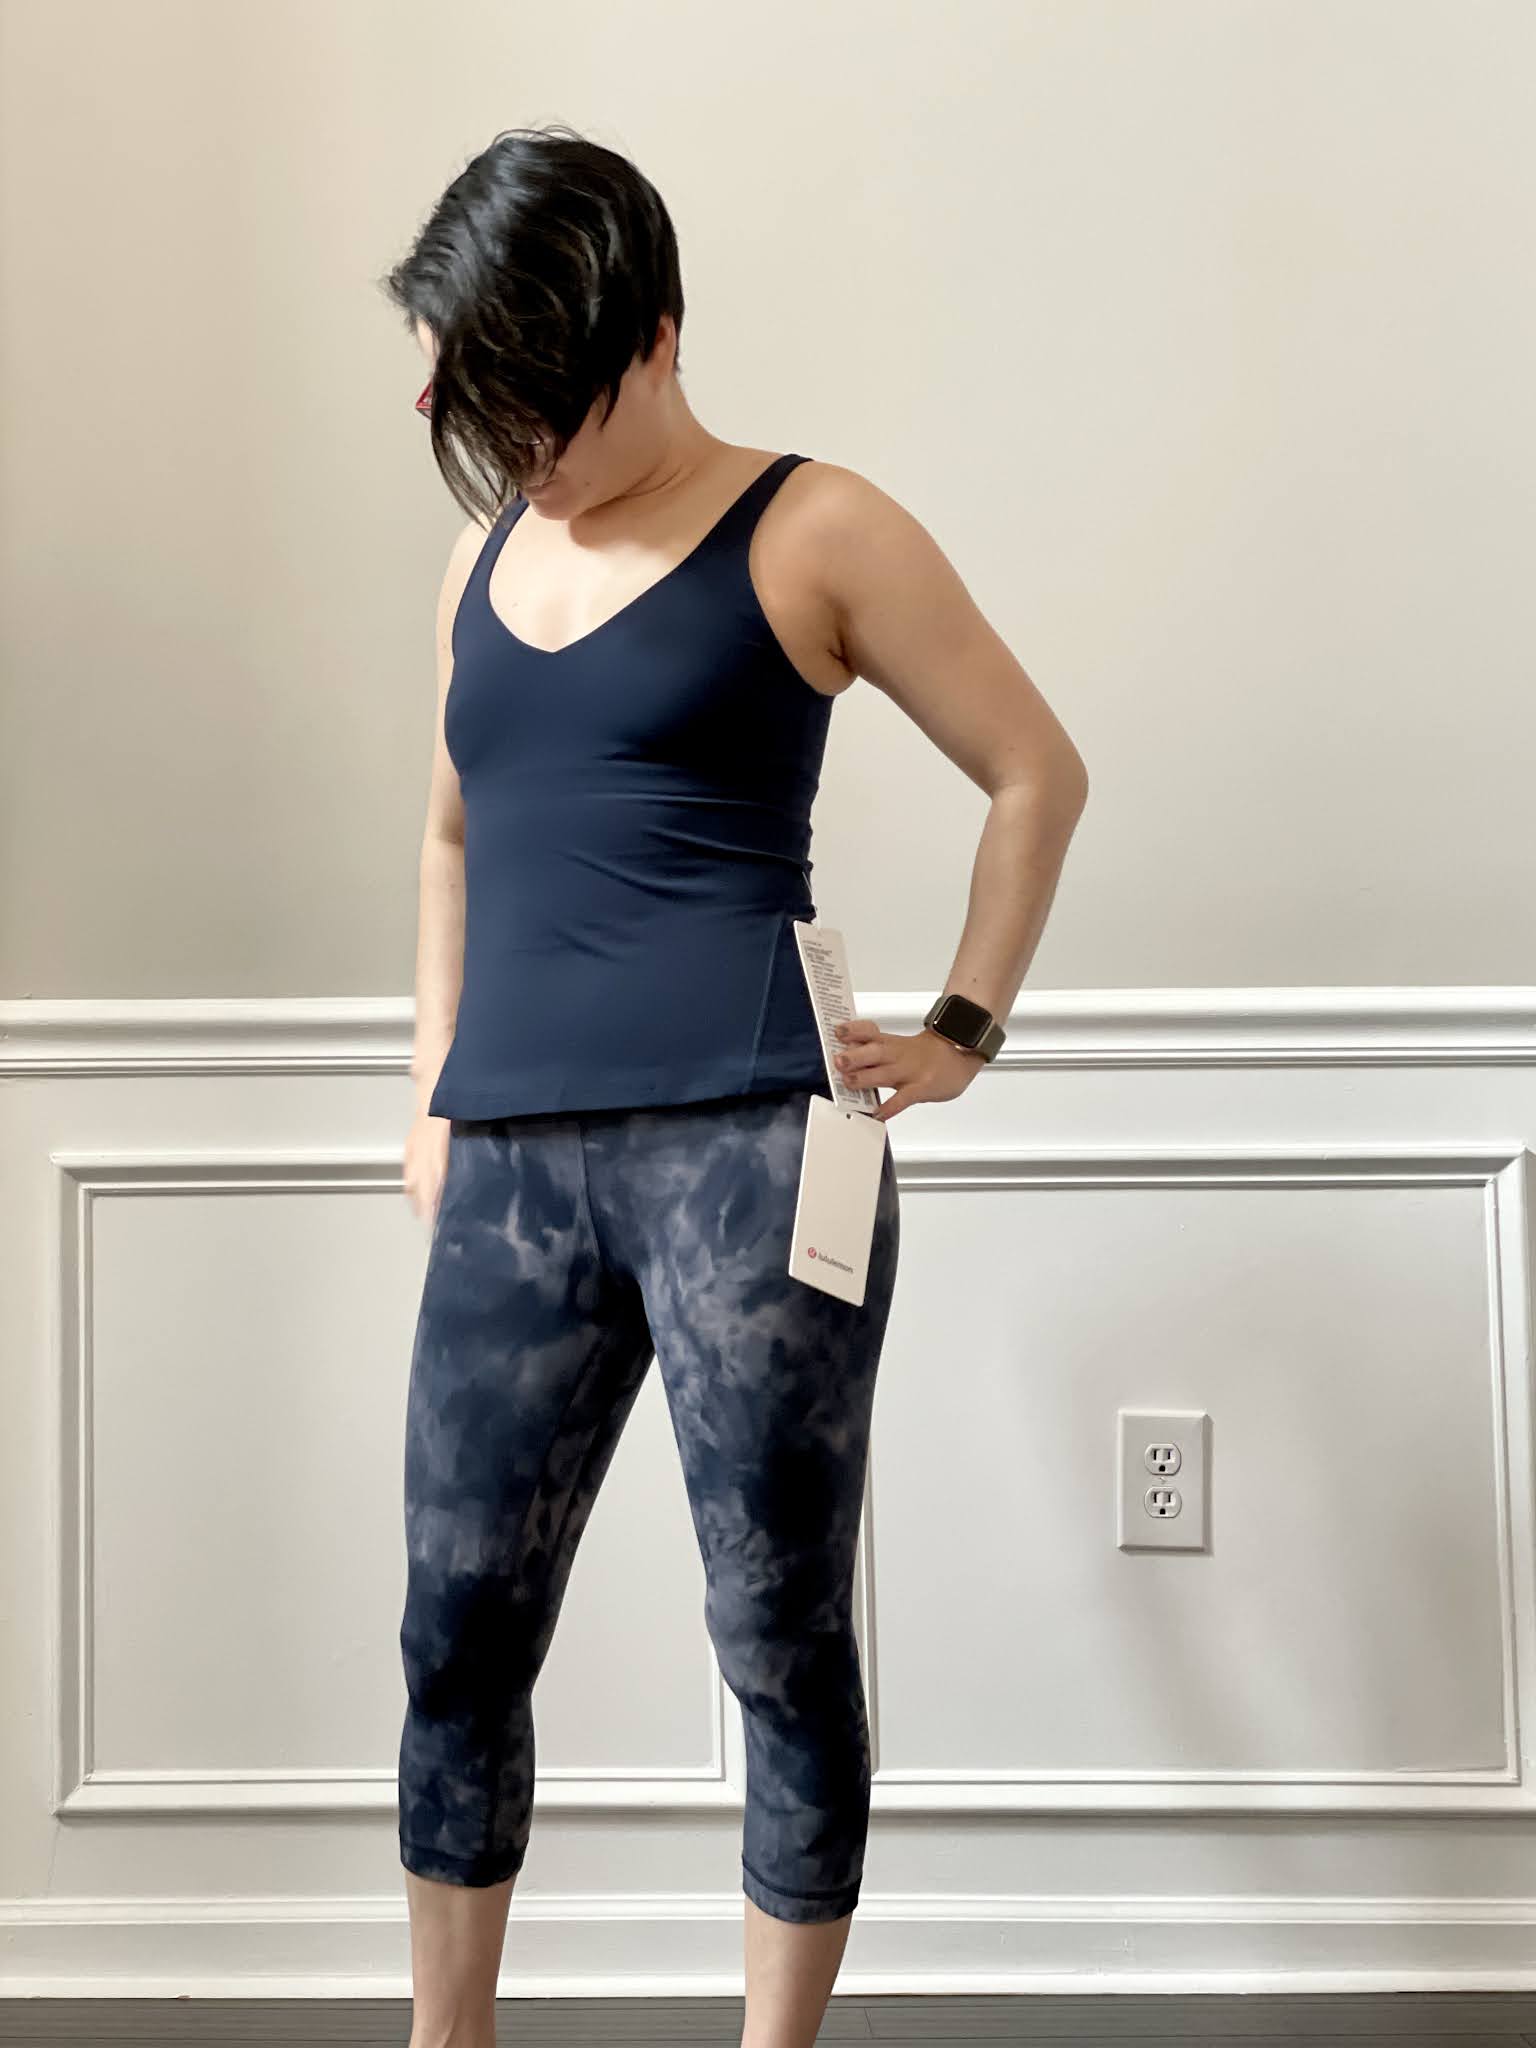 Fit Review! Align Waist Length Tank Top, Align Gathered Front Tank